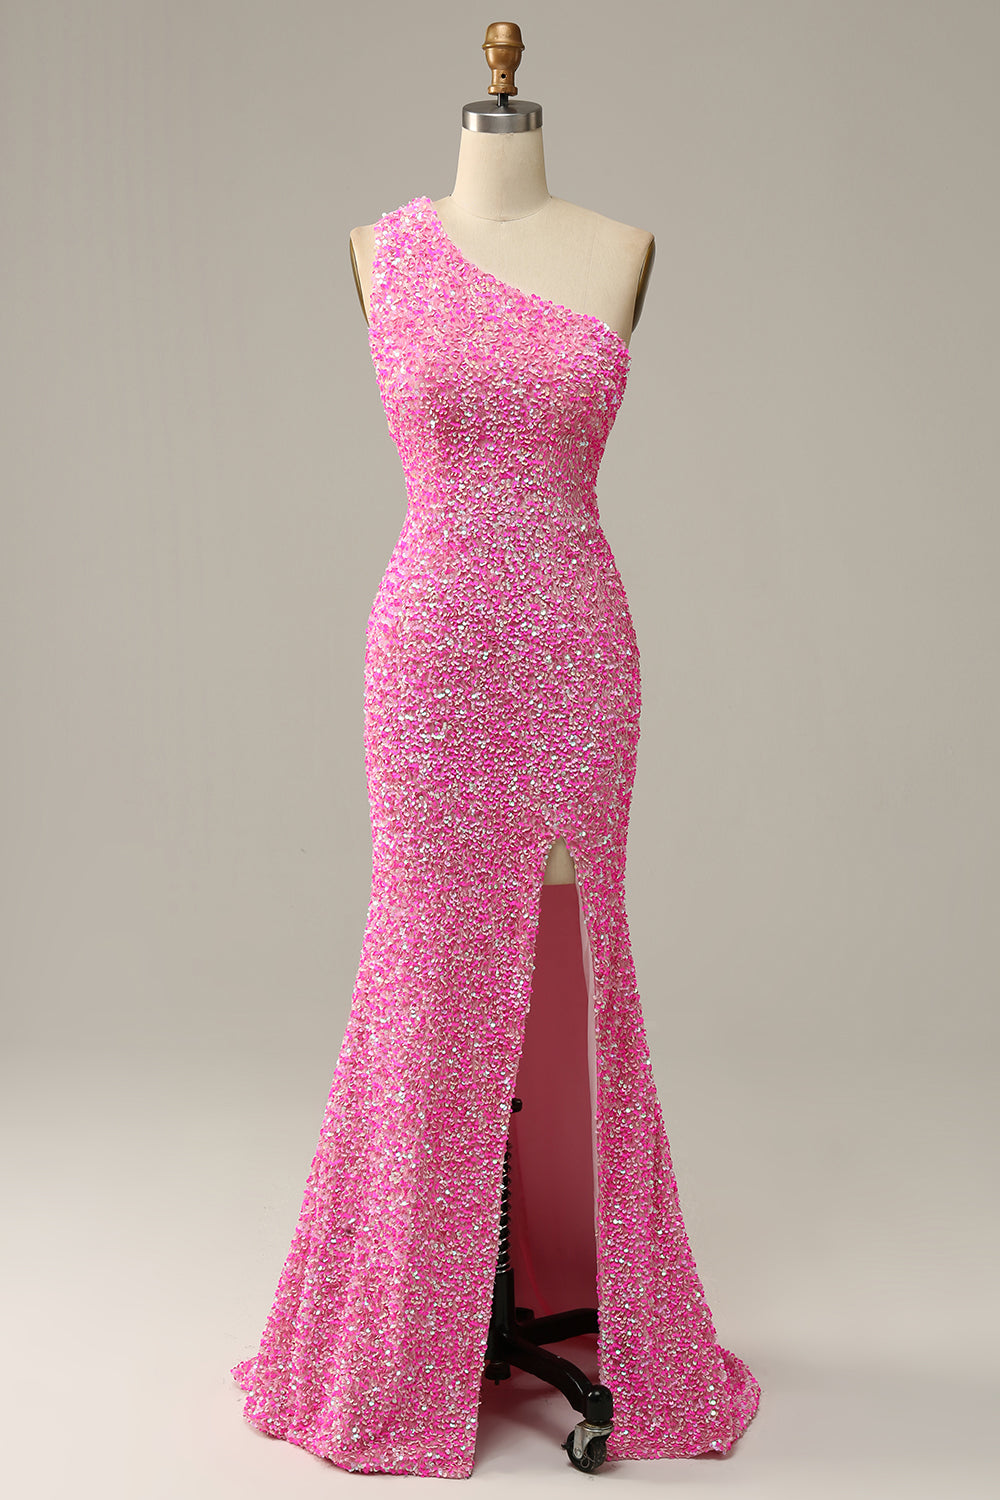 Fuchsia Sequined One Shoulder Mermaid Prom Dress With Slit